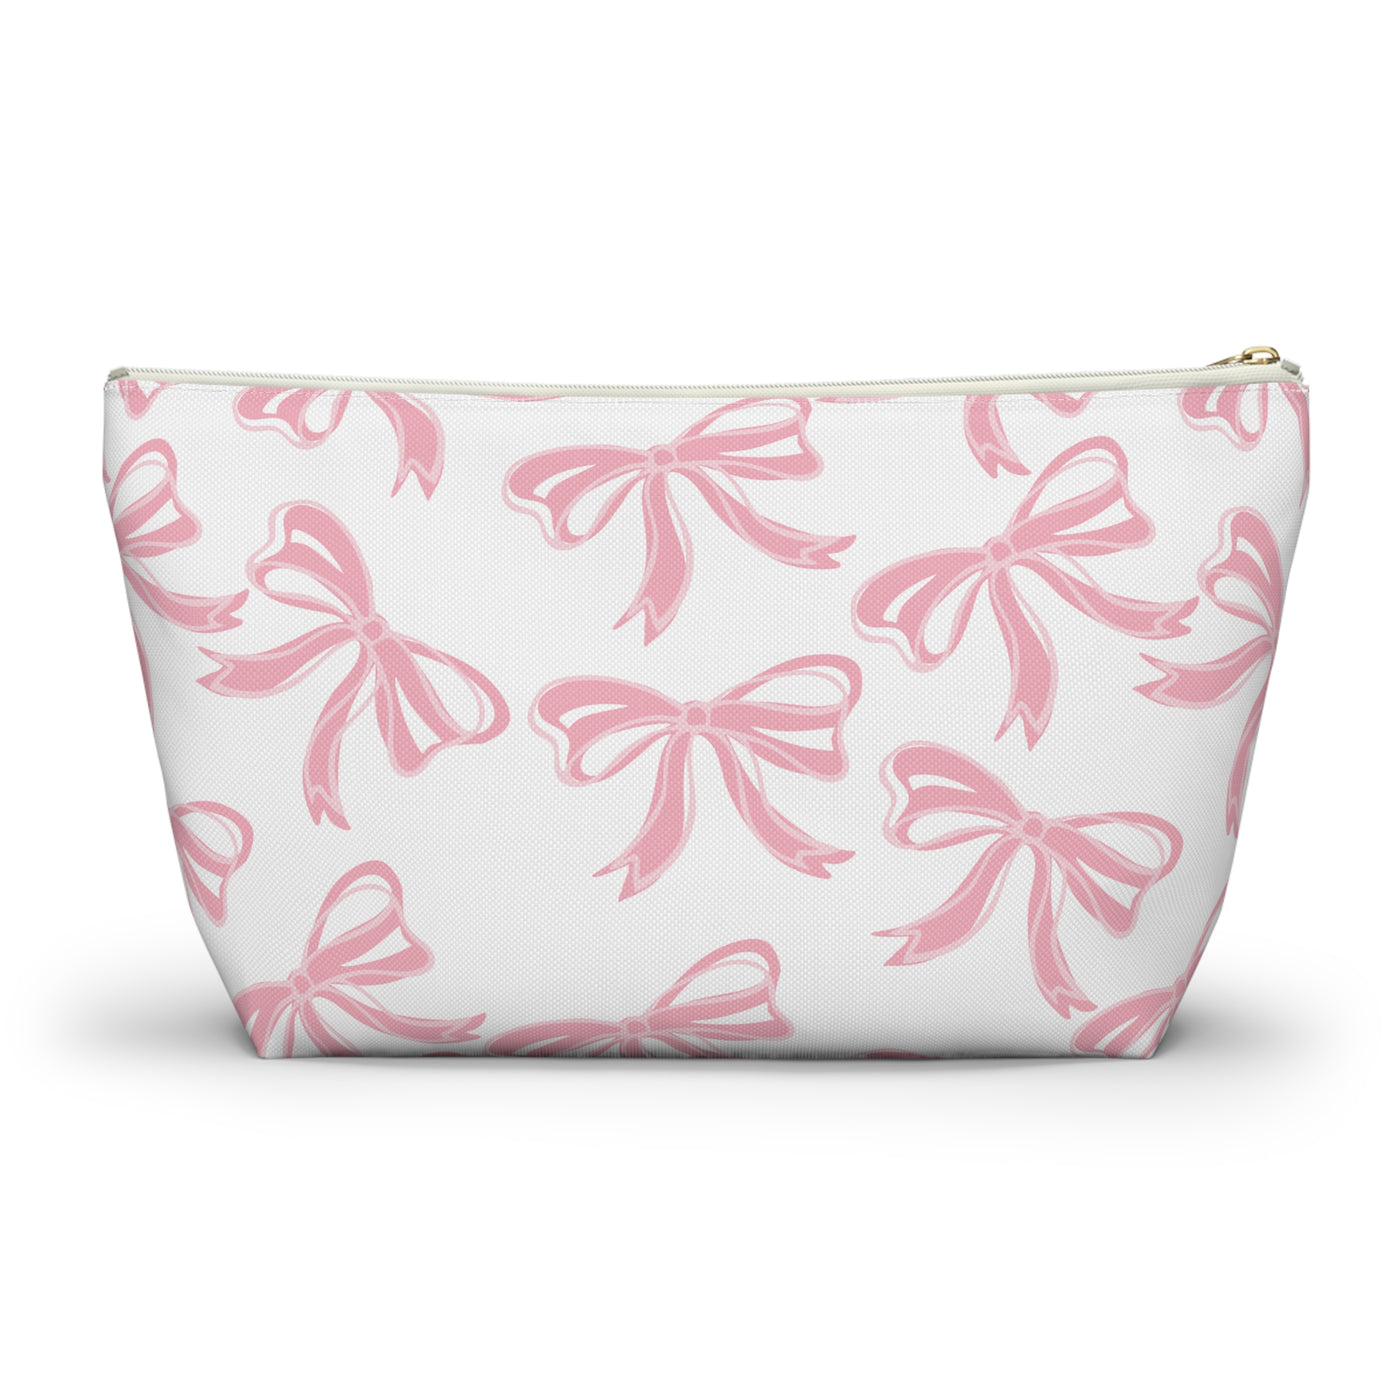 Coquette Pink Bow Monogram Makeup Bag, Blue French Toile Makeup Bag, Coquette Accessories, Pink Accessories, Pink Coquette Makeup Bag